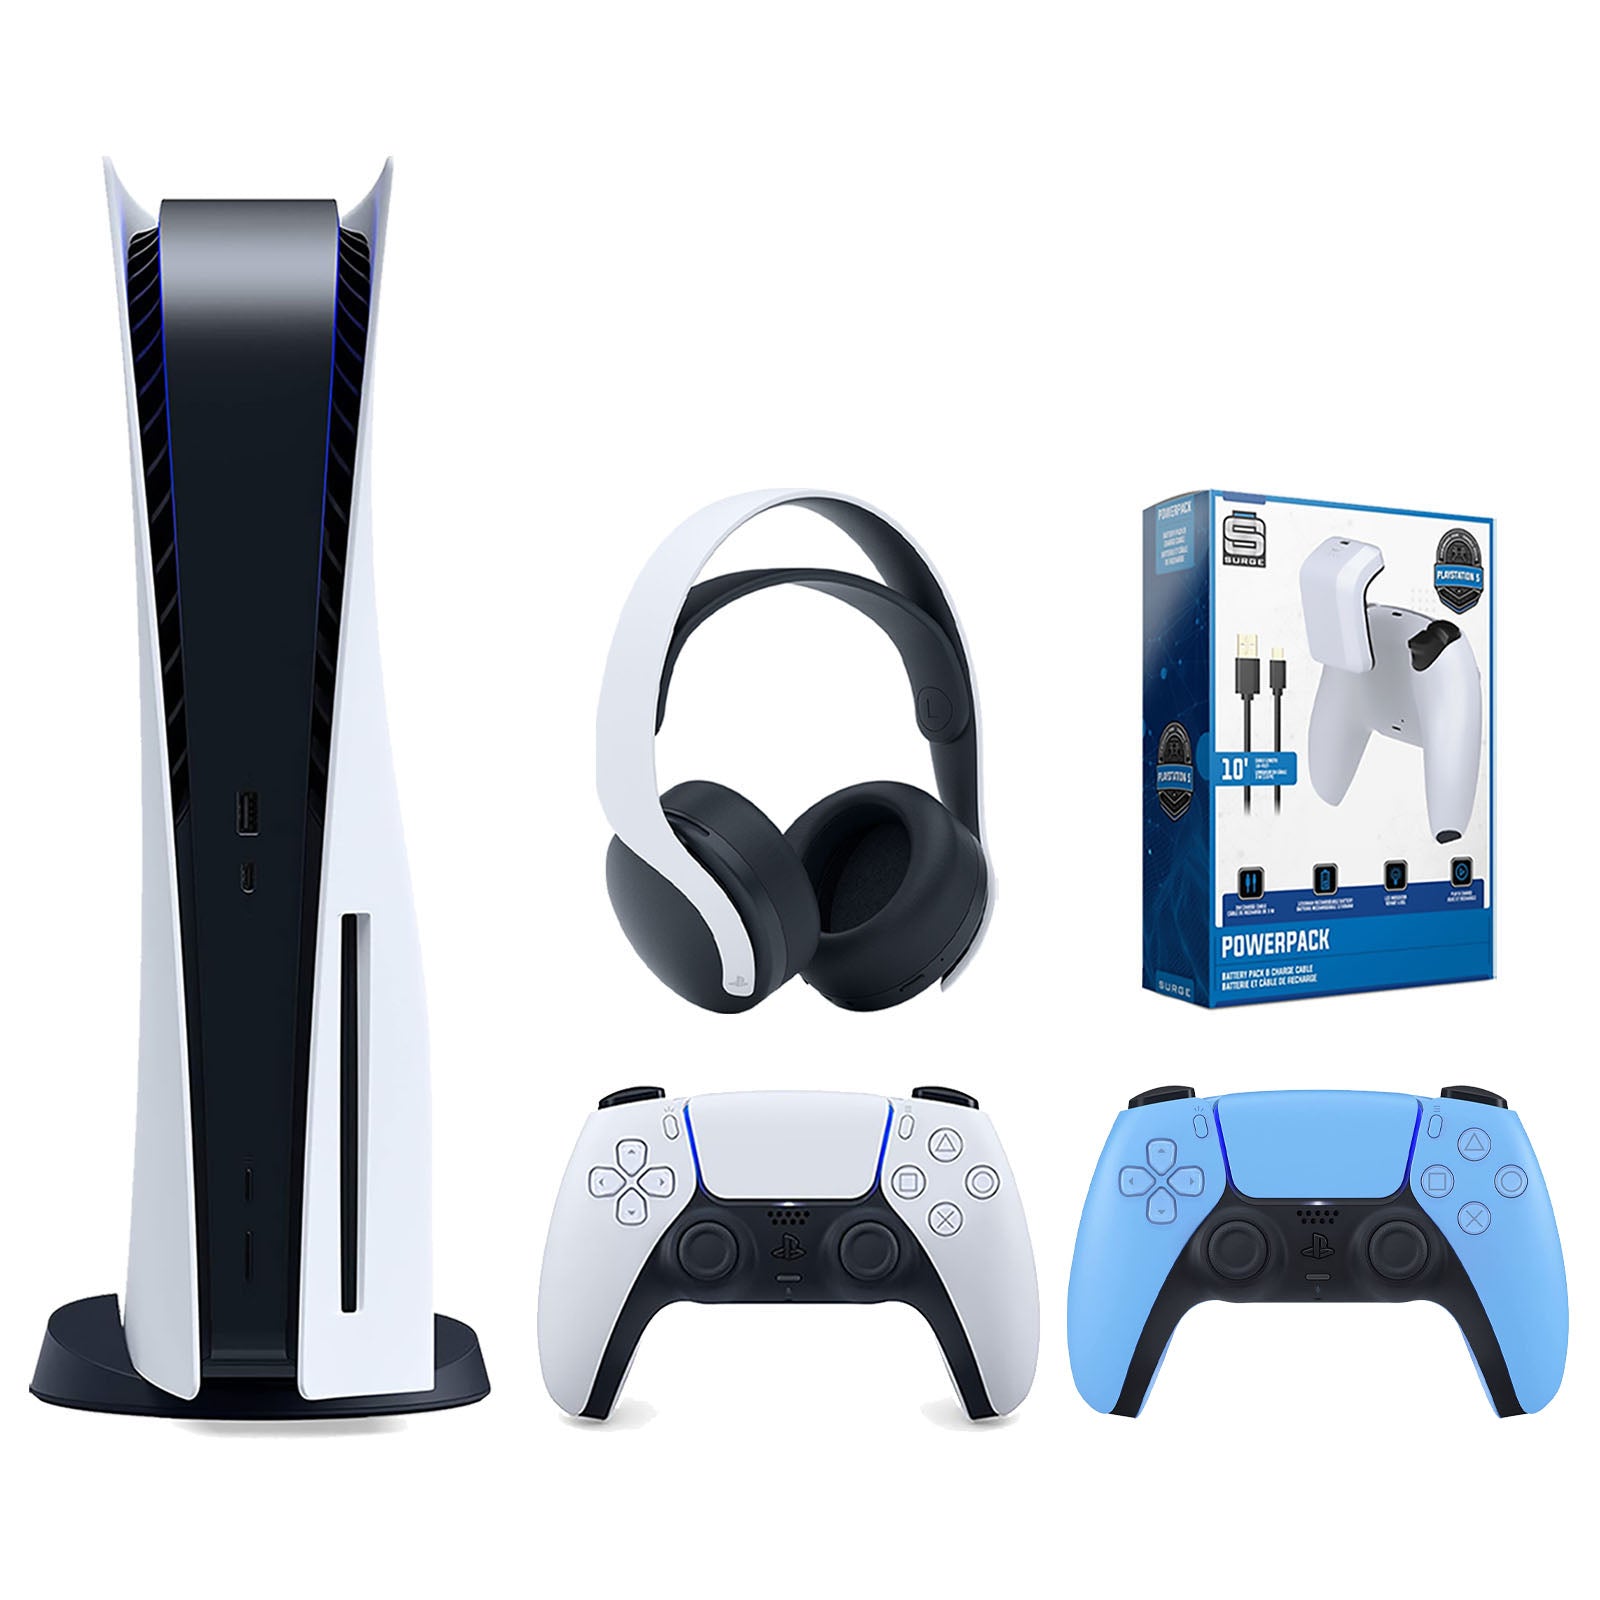 Sony Playstation 5 Disc Version Console with Extra Blue Controller, White PULSE 3D Headset and Surge PowerPack Battery Pack & Charge Cable Bundle - Pro-Distributing